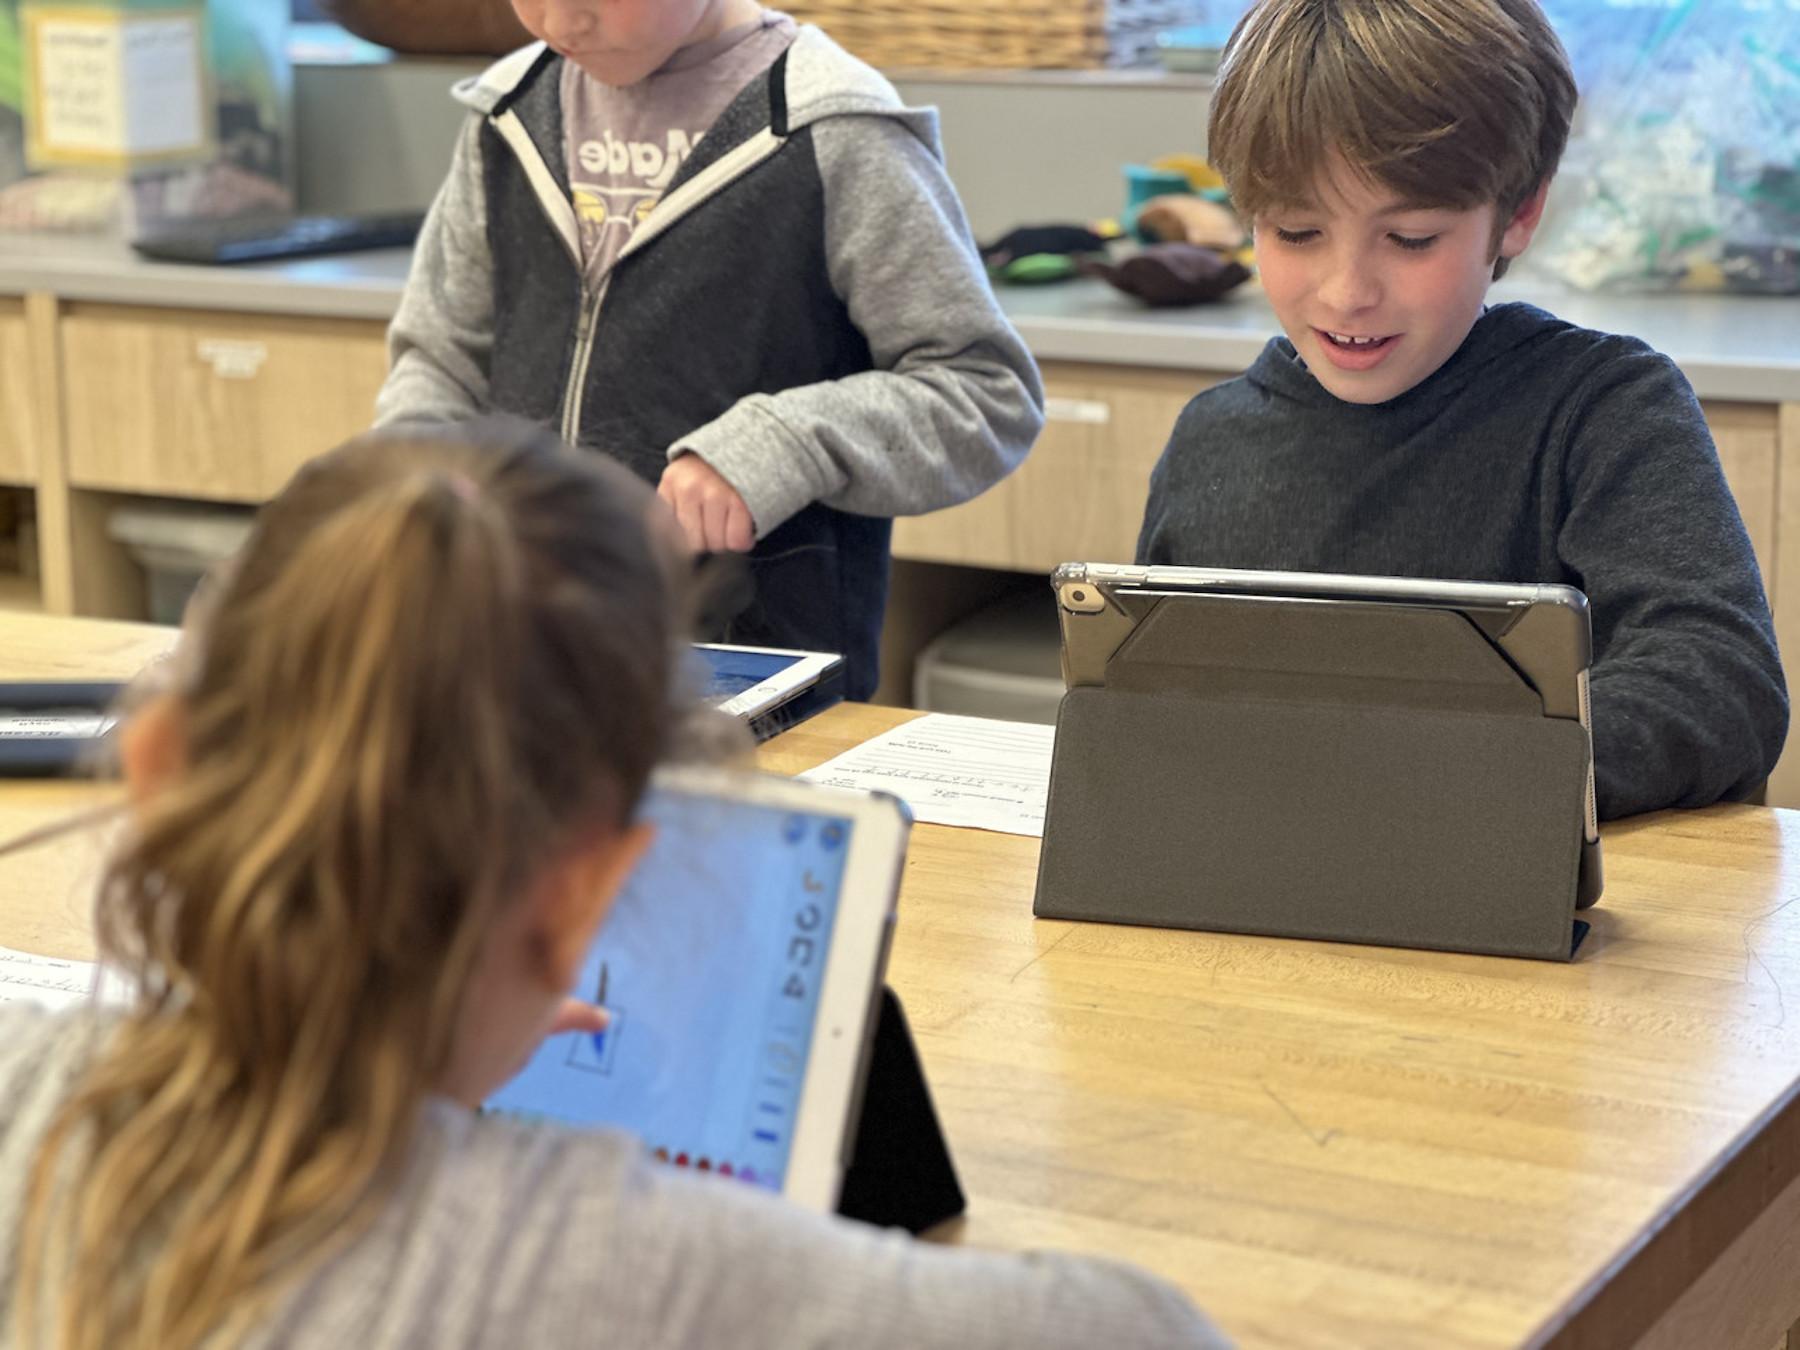 Group of three Fieldston Lower students work together on iPads in classroom.